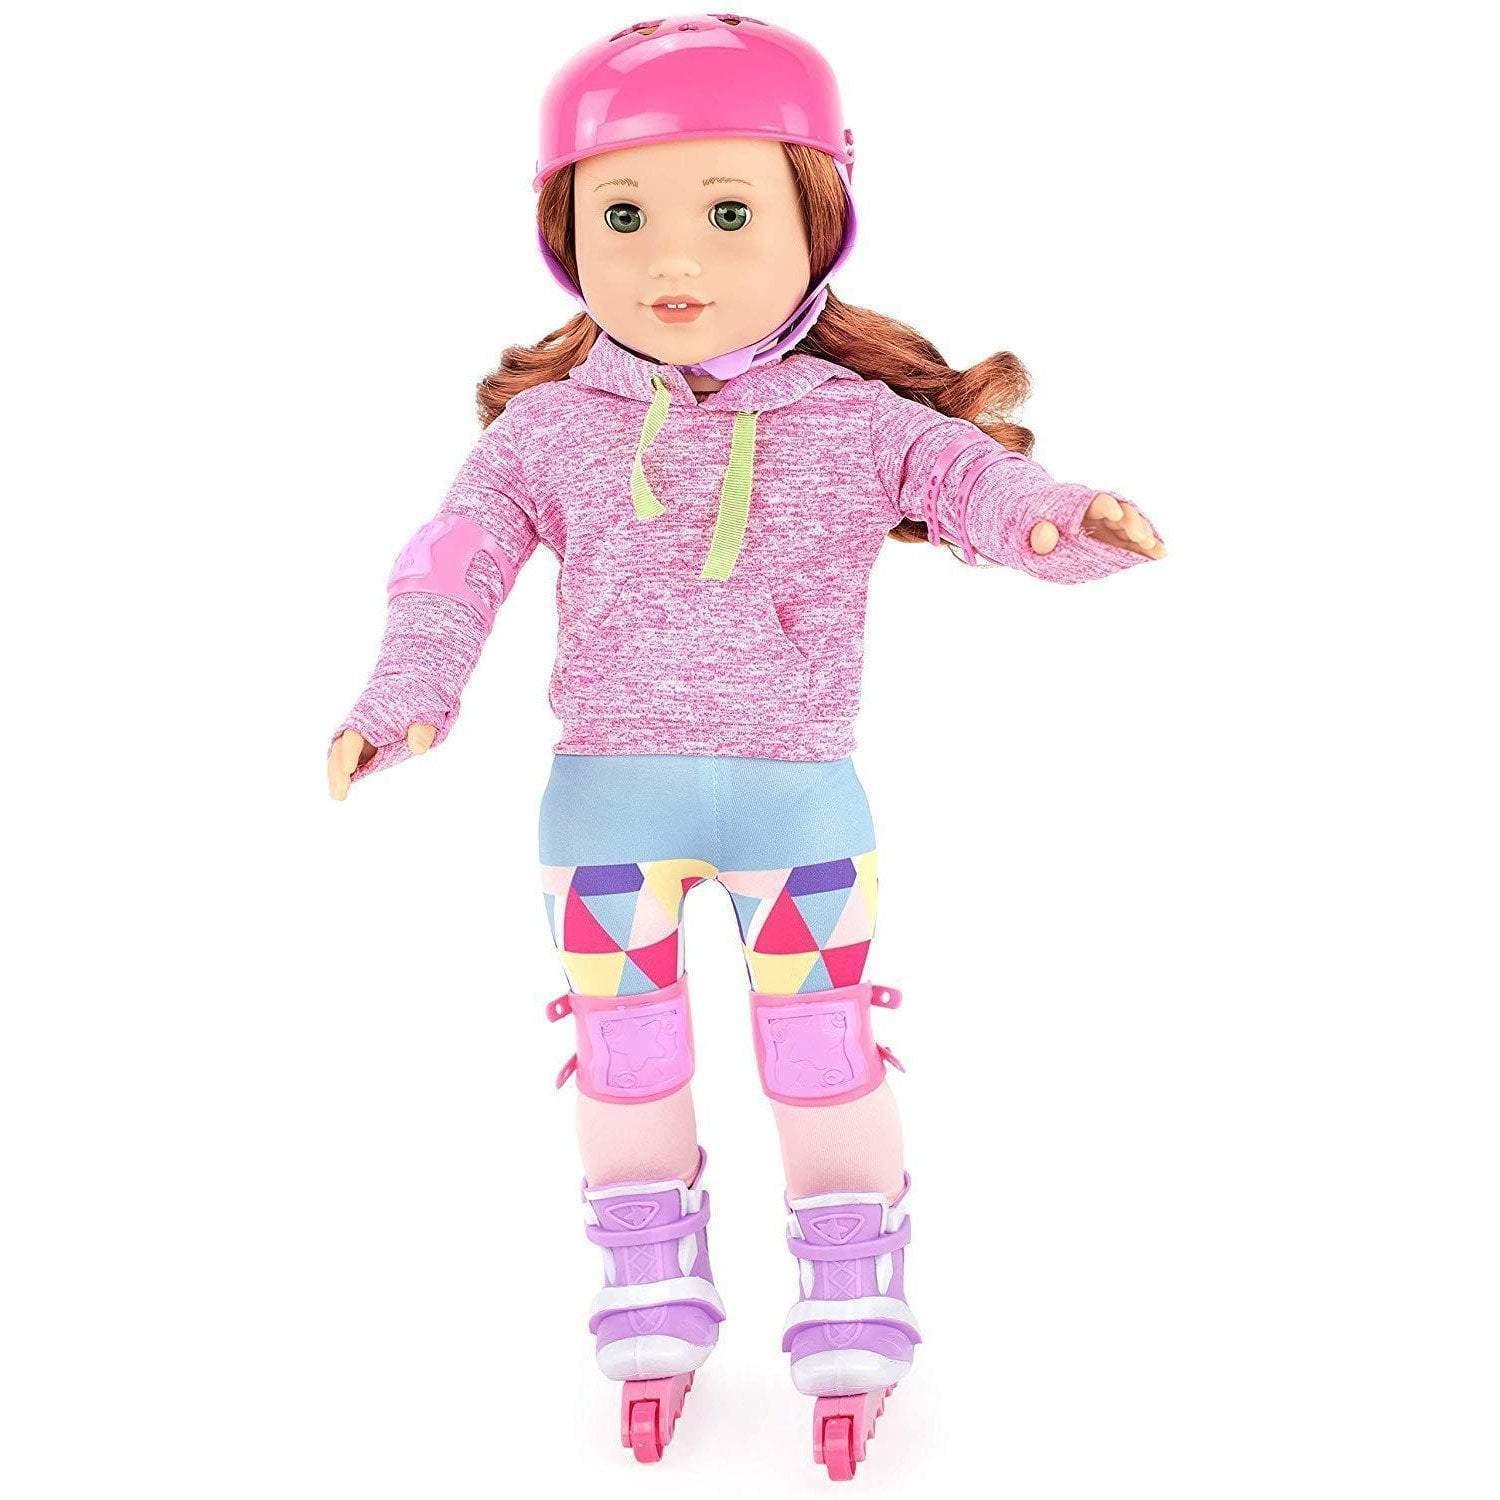 møde efterår maskine Playtime by Eimmie 18 Inch Doll Roller Skate Outfit and Accessories